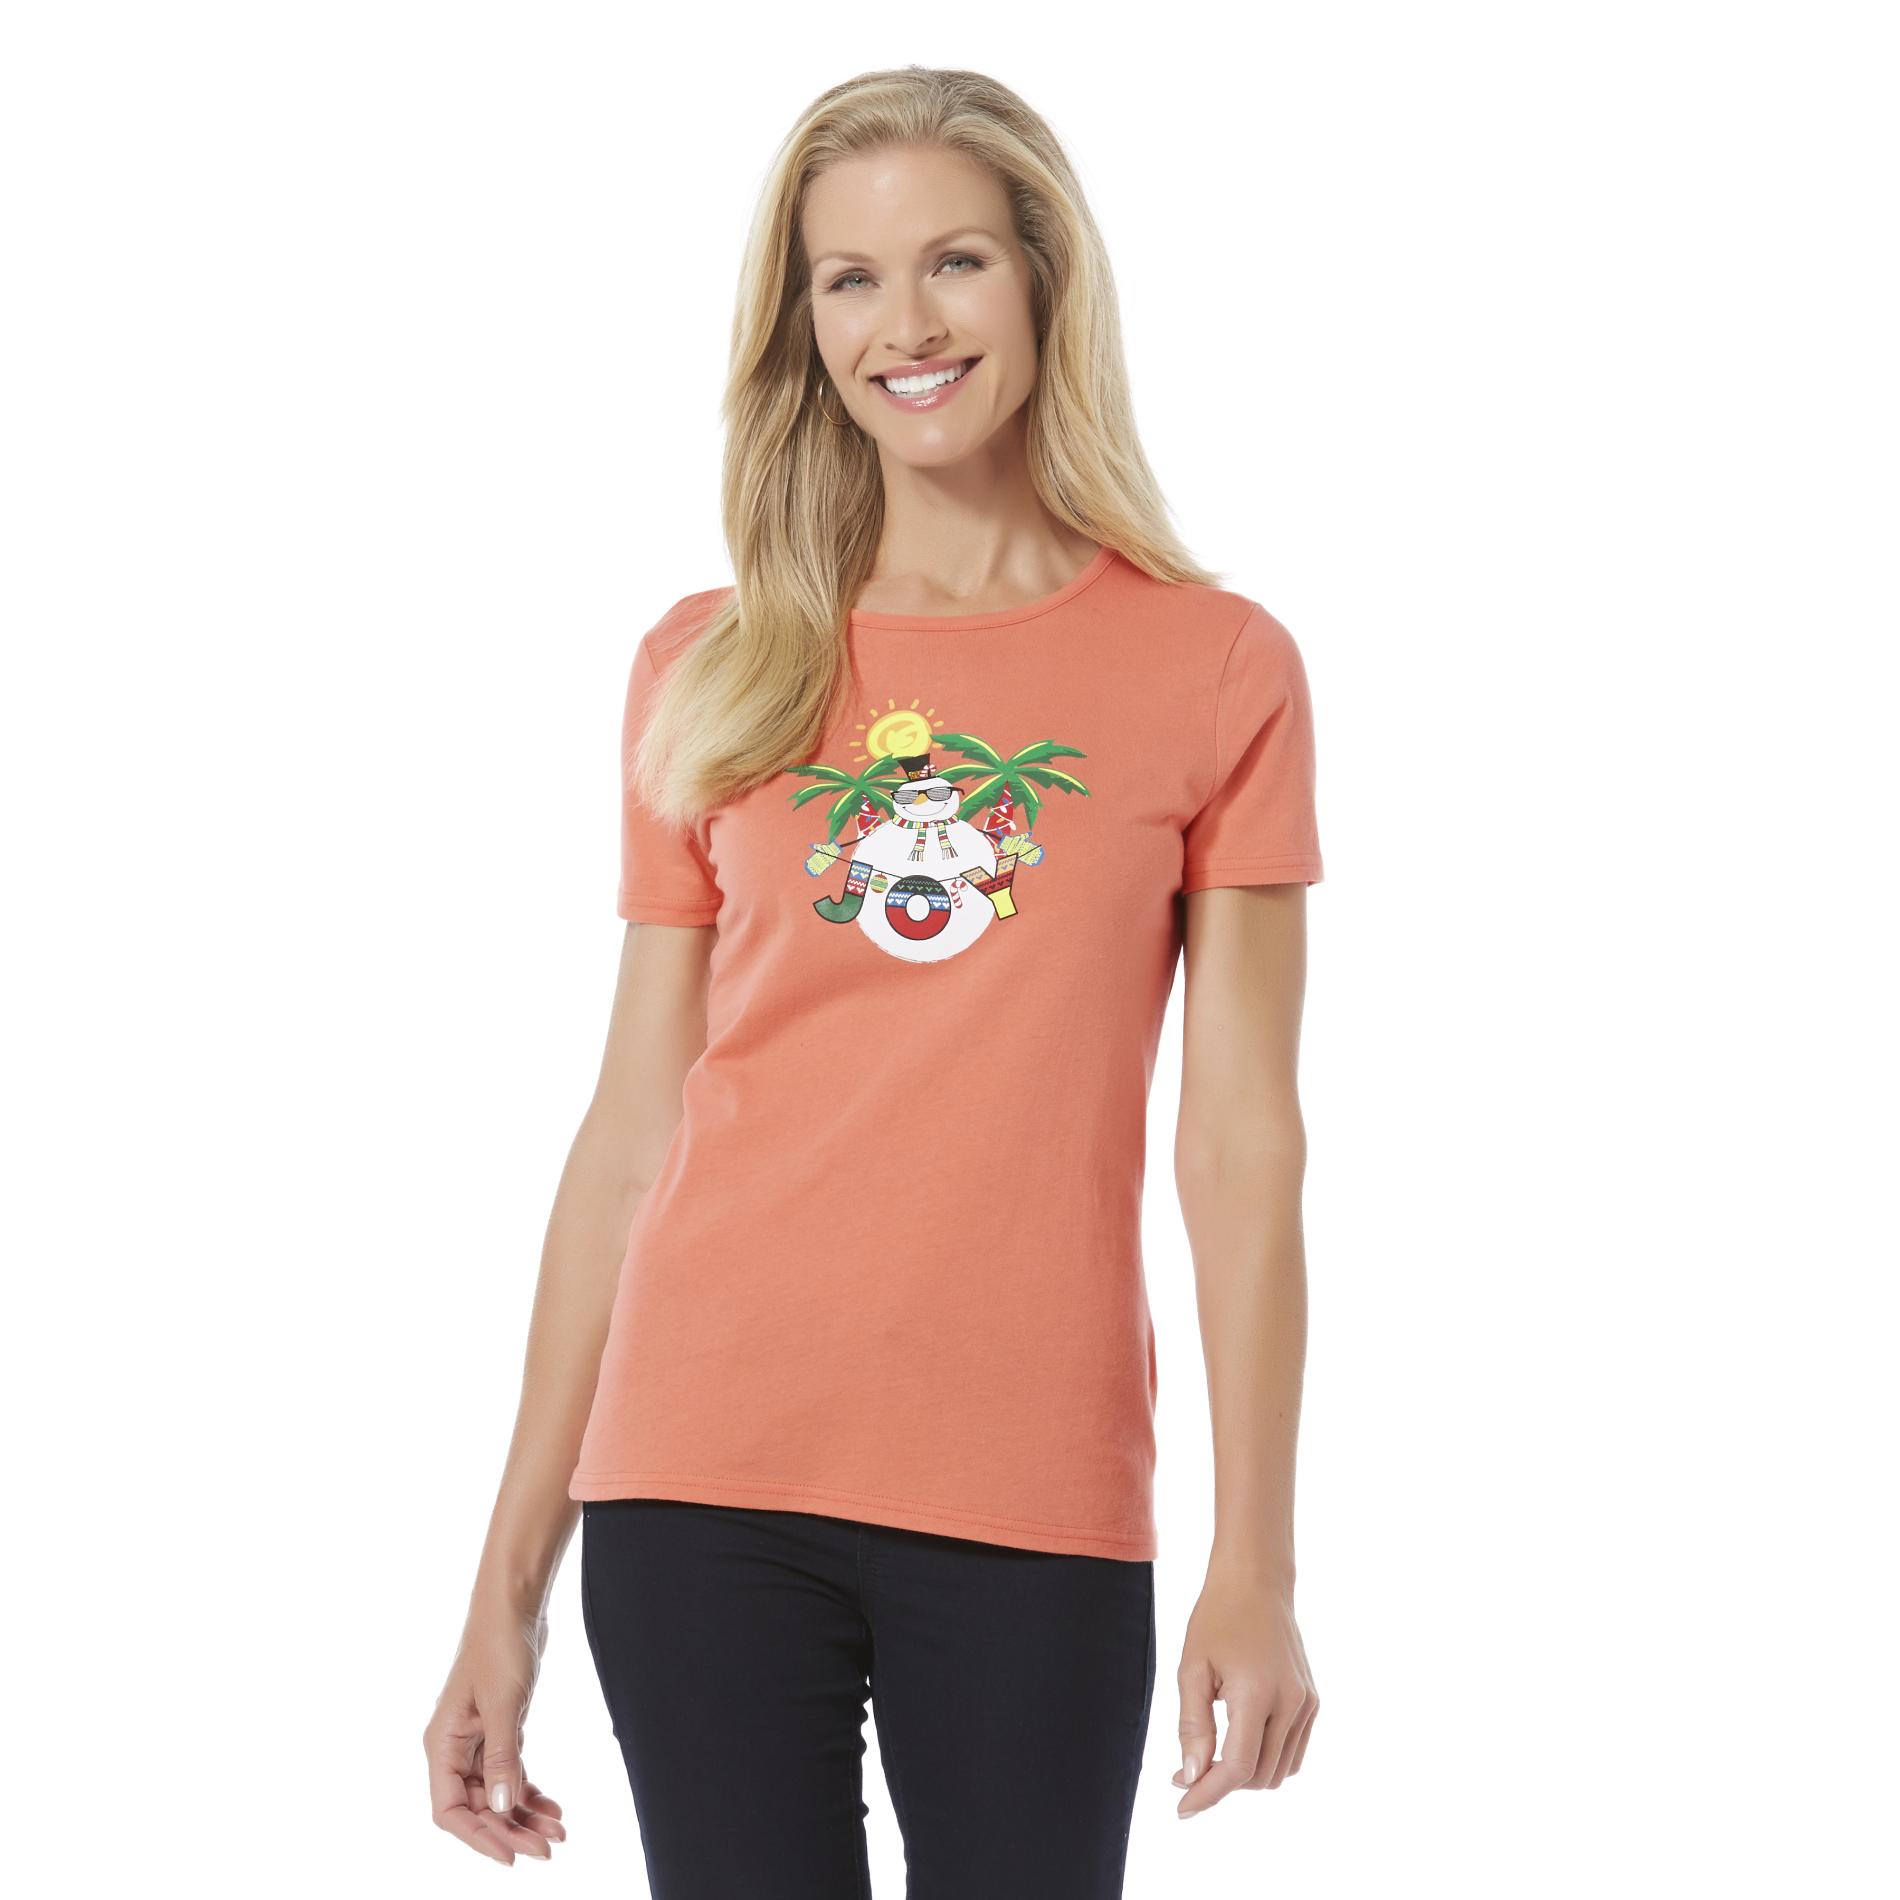 Holiday Editions Women's Christmas Graphic T-Shirt - Snowman